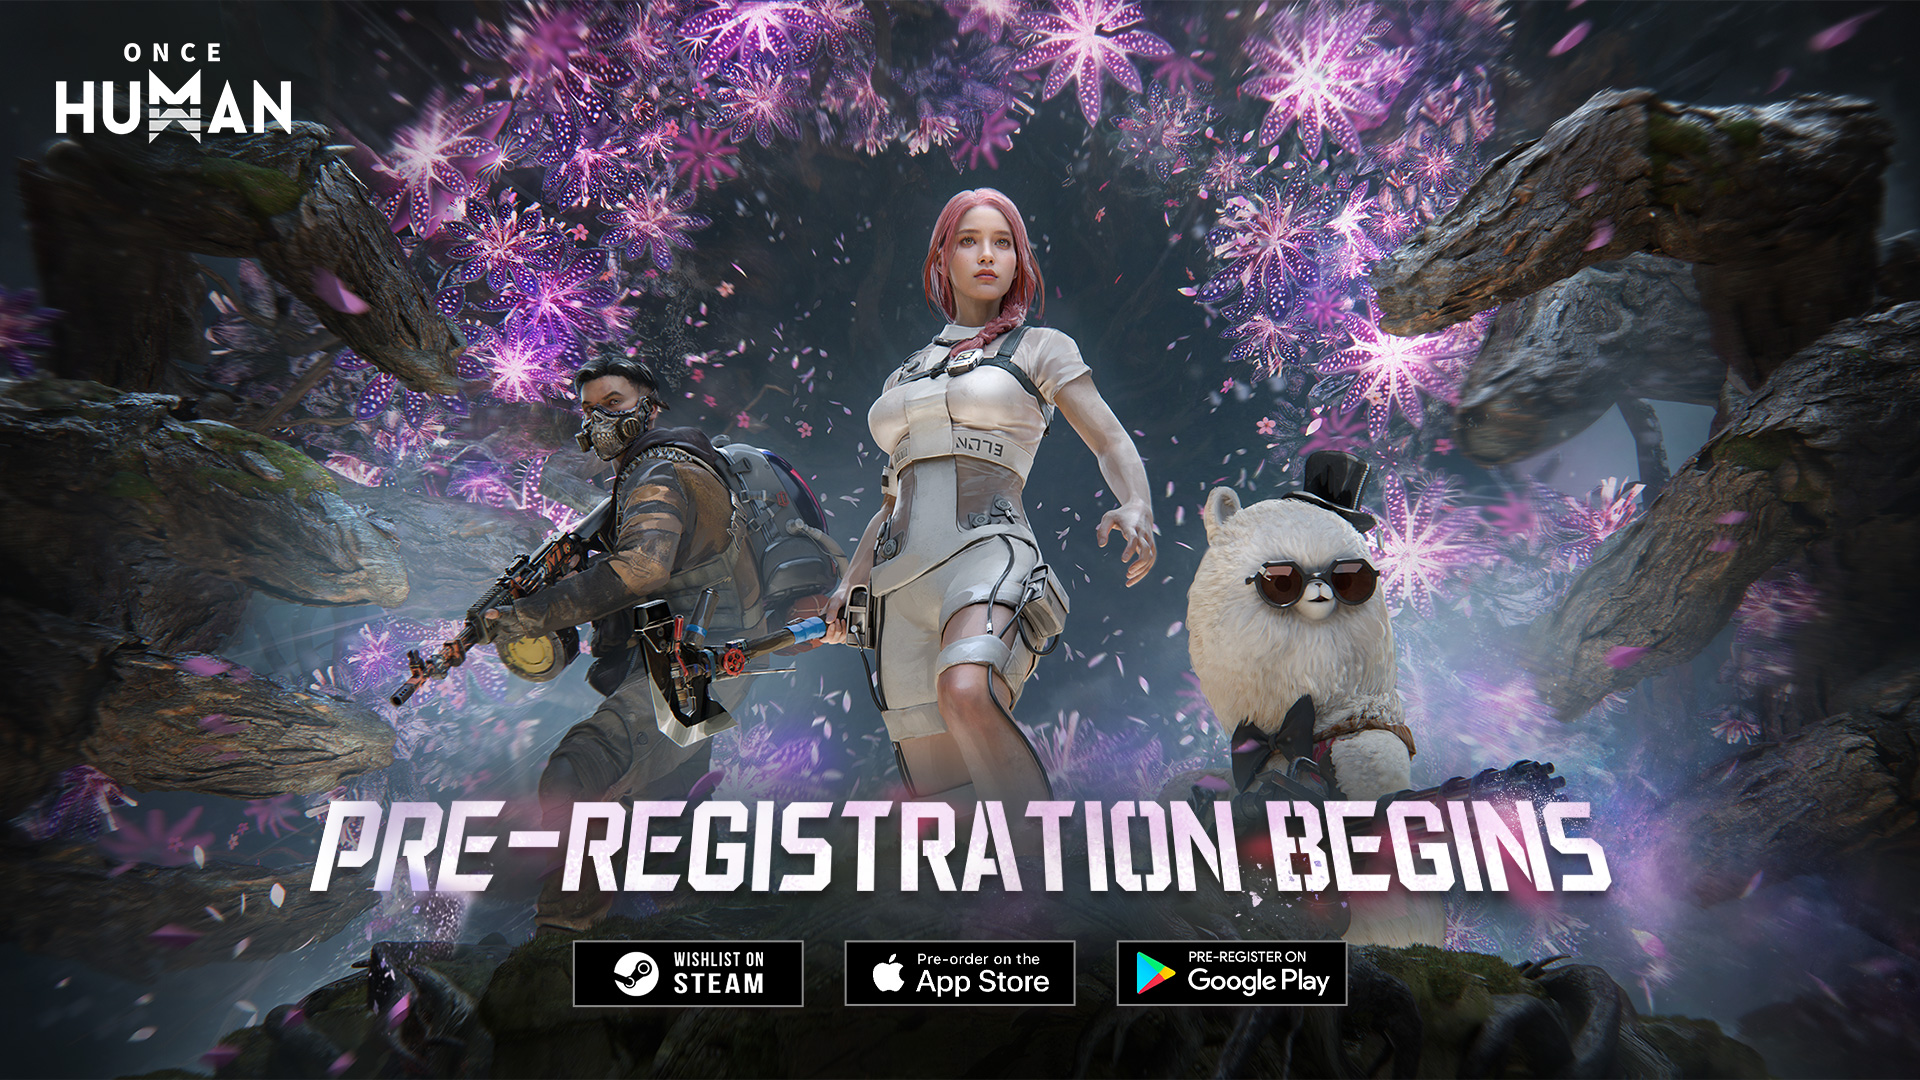 Once Human Pre-Registration for All Platforms is now Available